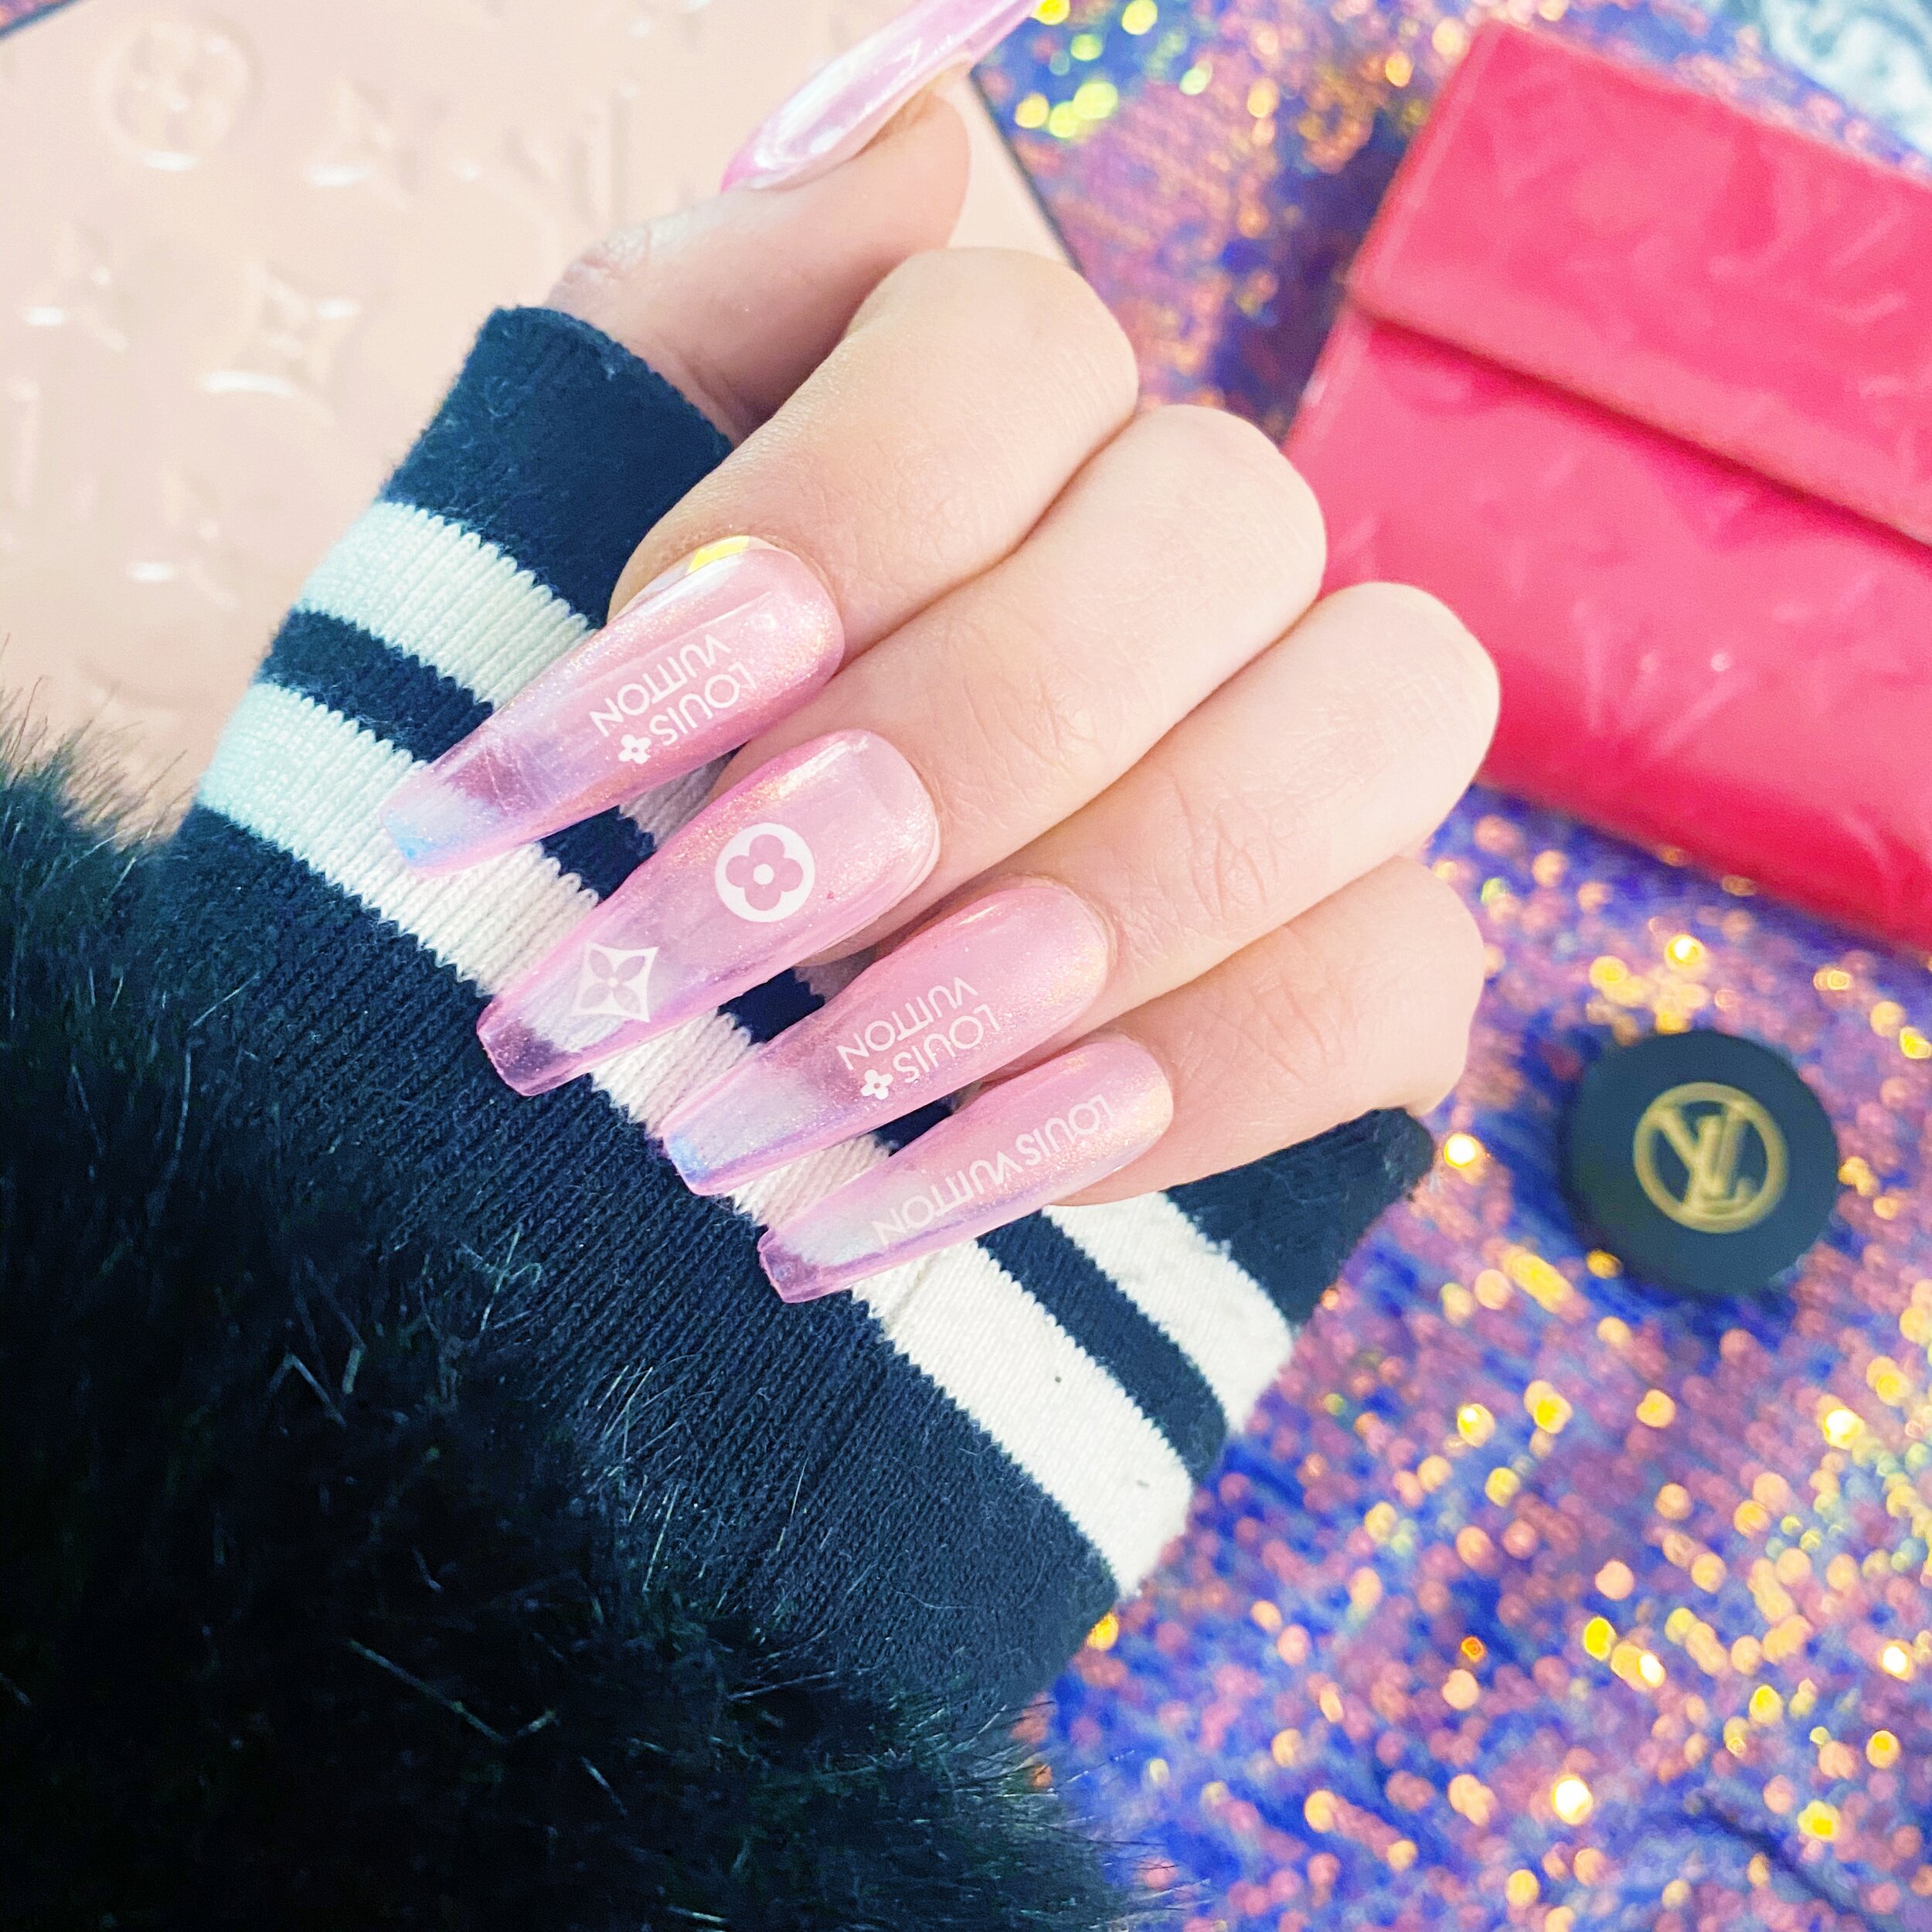 The-Caroline-Doll-Louis-Vuitton-Nails-Press-On-Manicure-At-Home-Beauty-Hack-Quarantine-Beauty-Blonde-Beauty-Influencer-1.JPG